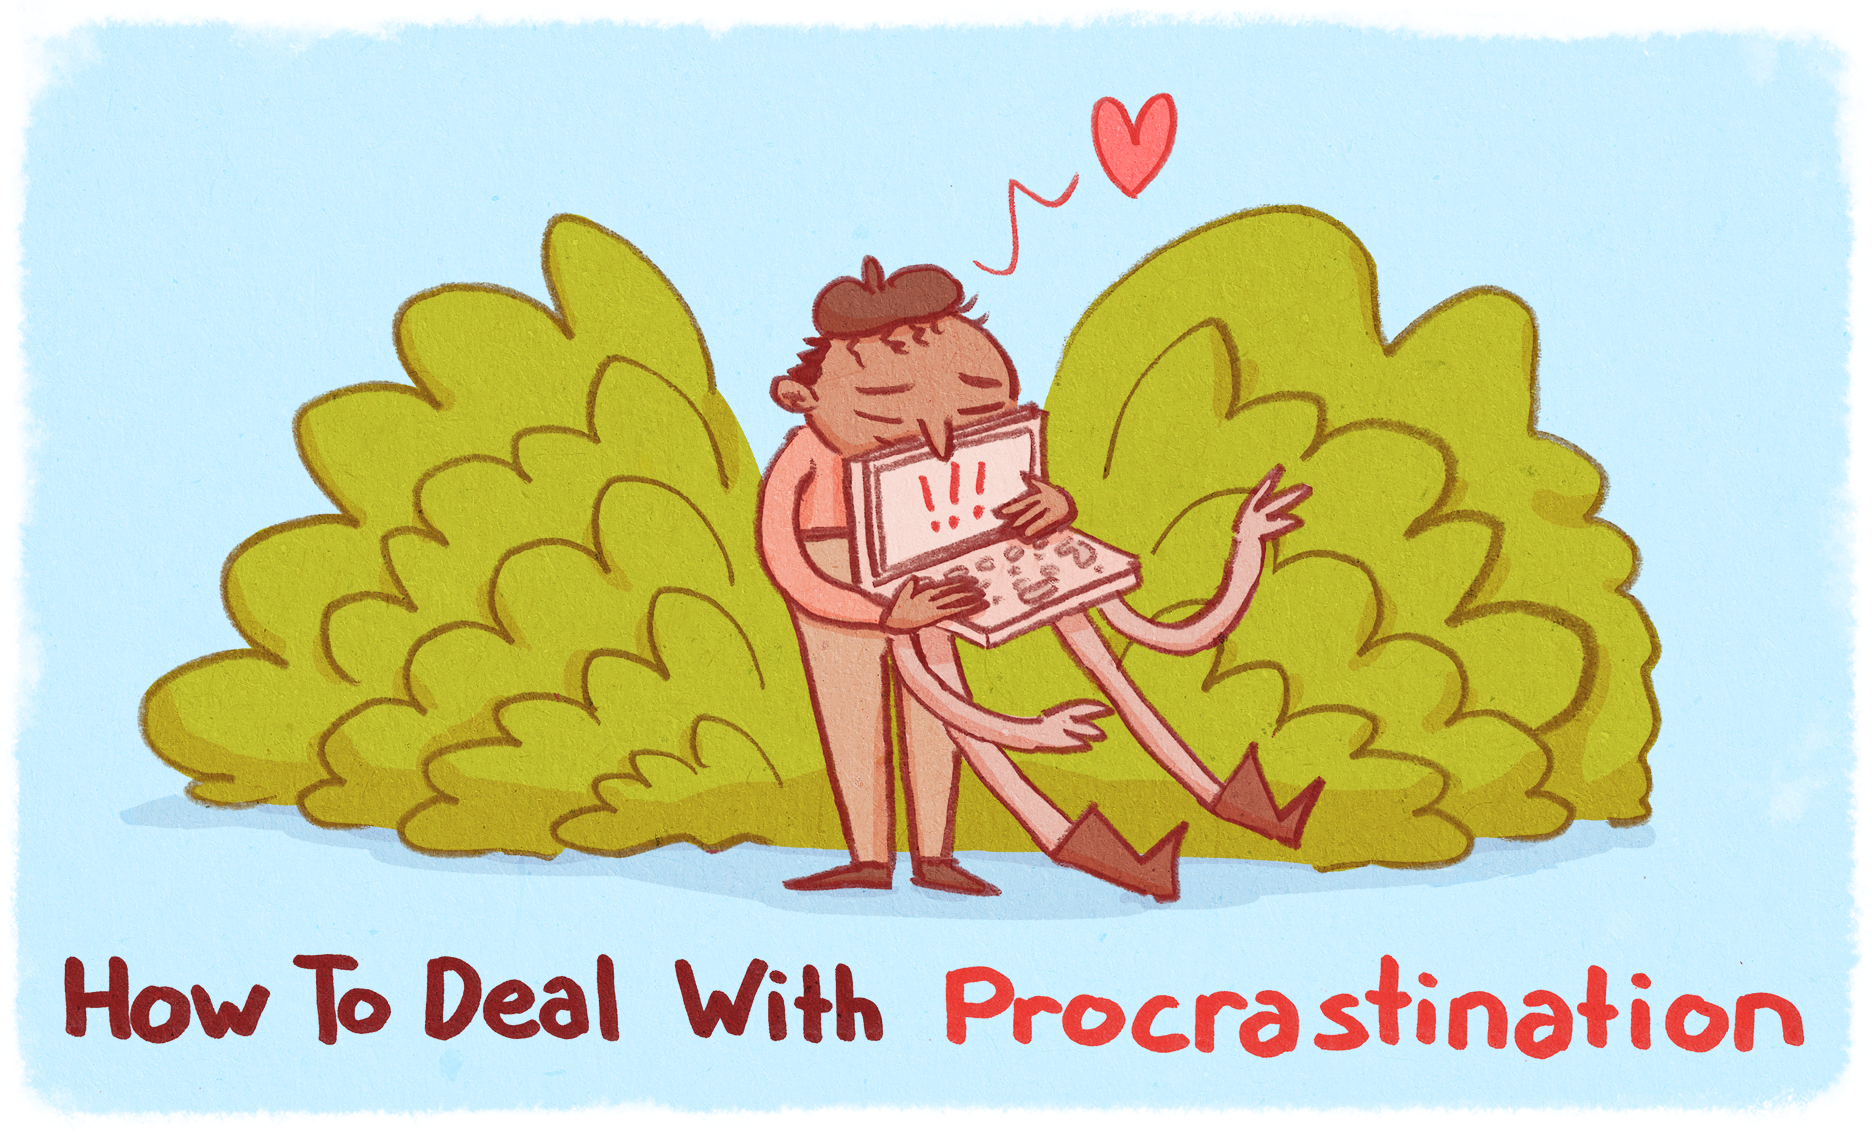 How to deal with Procrastination